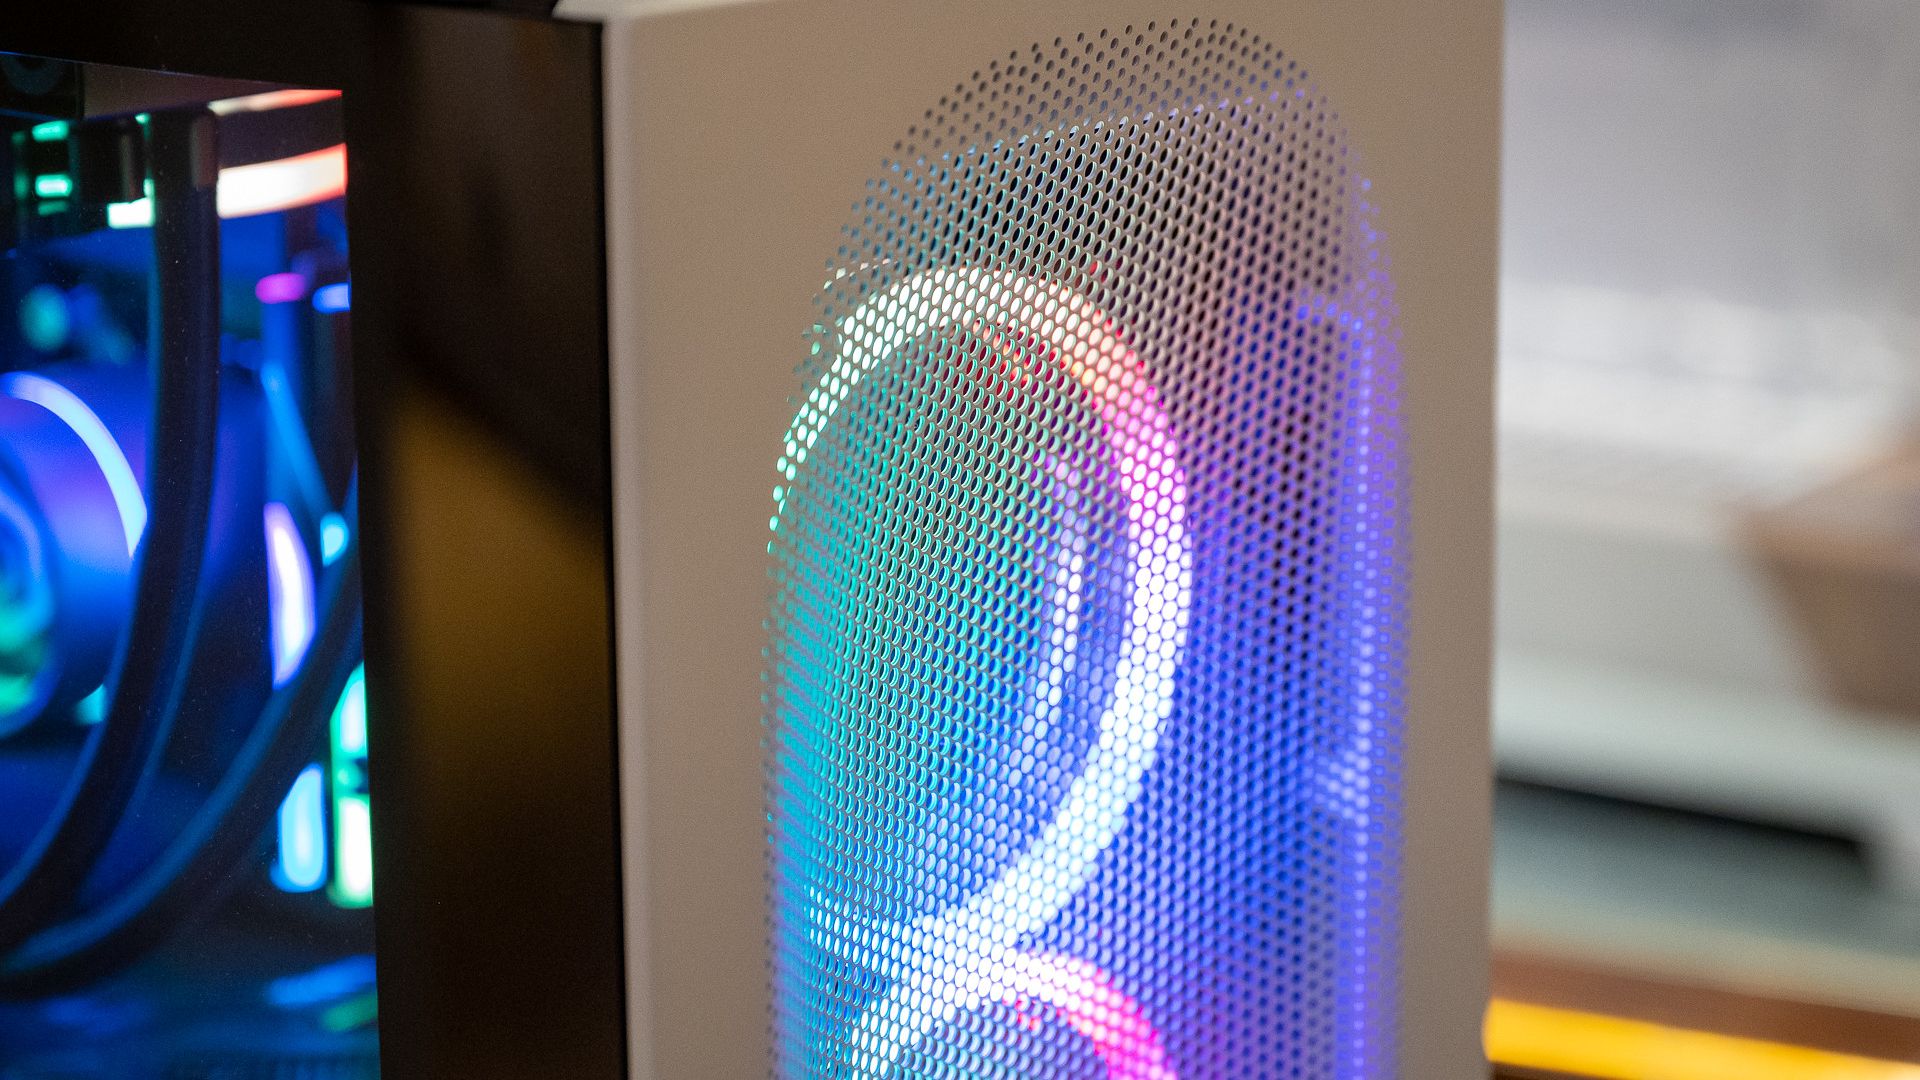 CyberPowerPC Grvty High Airflow Series gaming PC case's RGB fan and vents